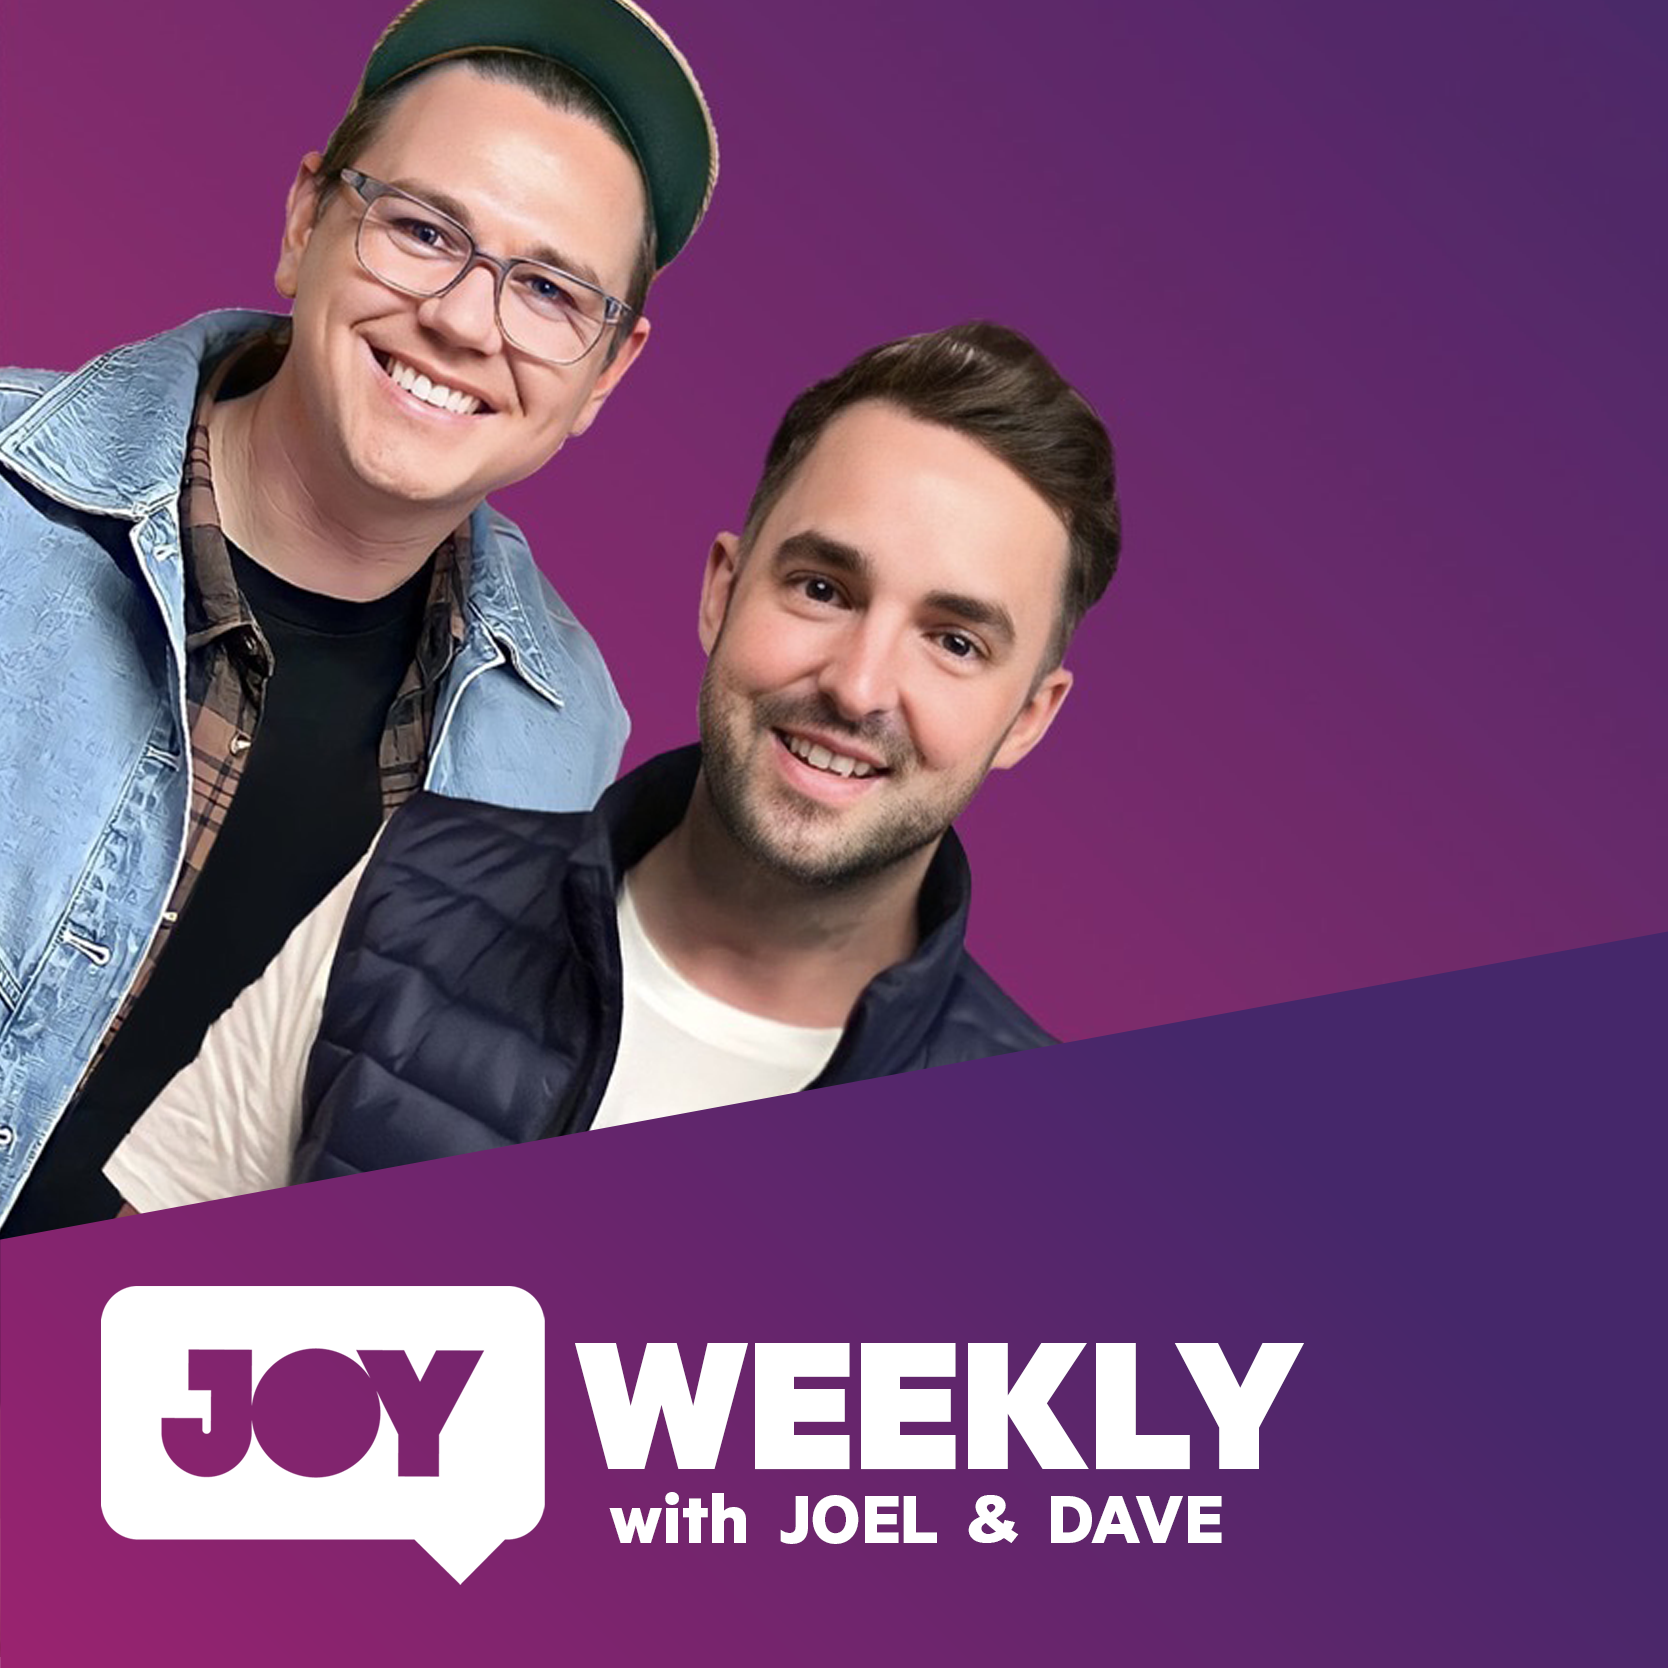 A famous popstar takes over our show & Joel asks the hard questions on “Joel’s Triva” – JW208